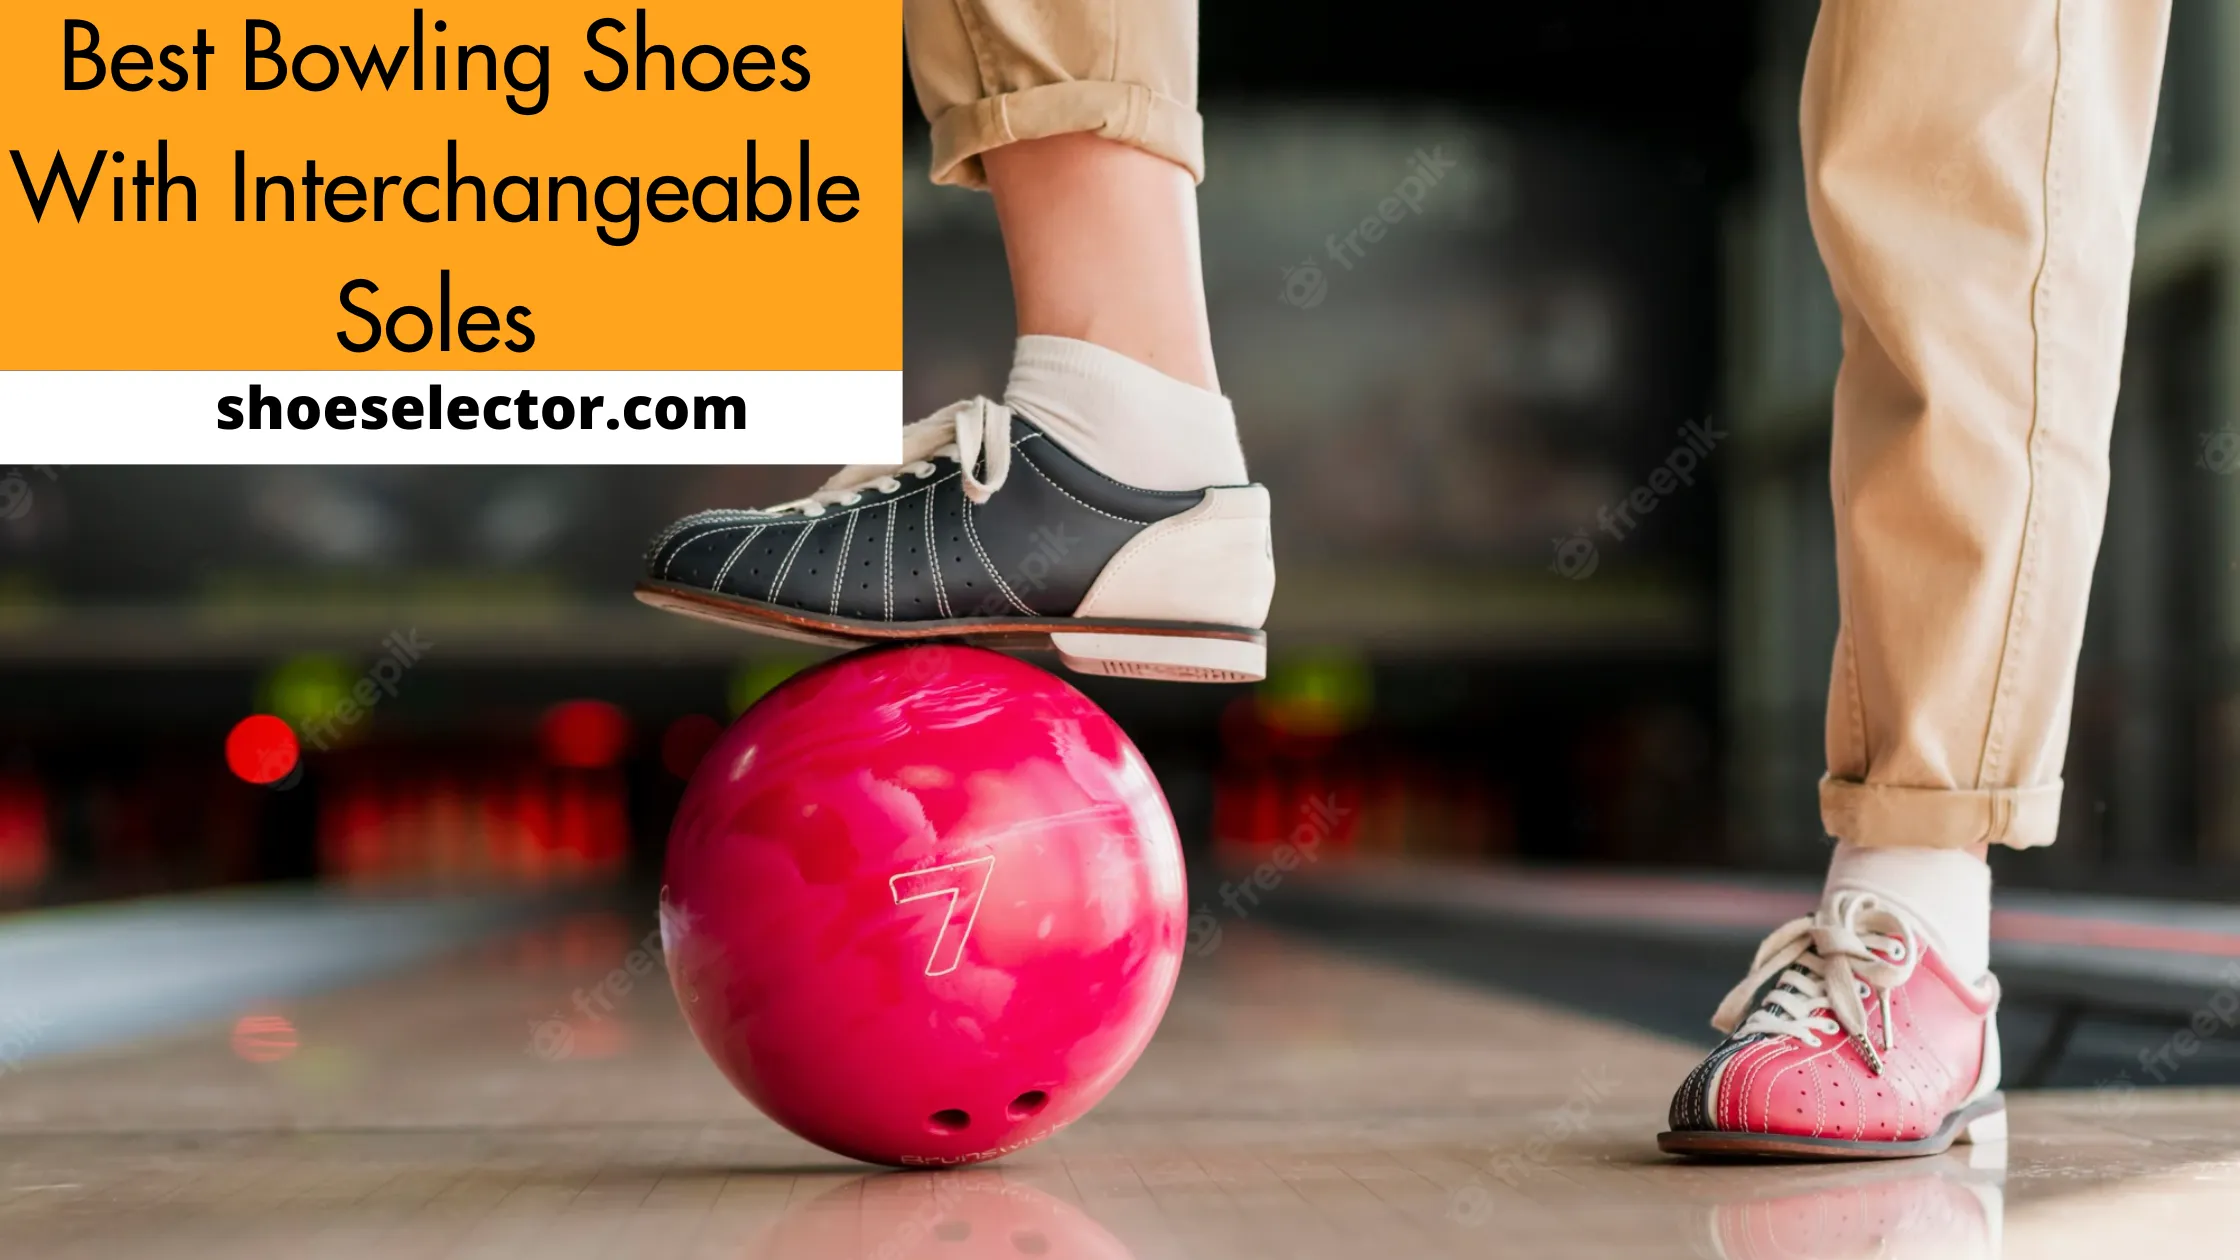 Best Bowling Shoes With Interchangeable Soles - Latest Guide